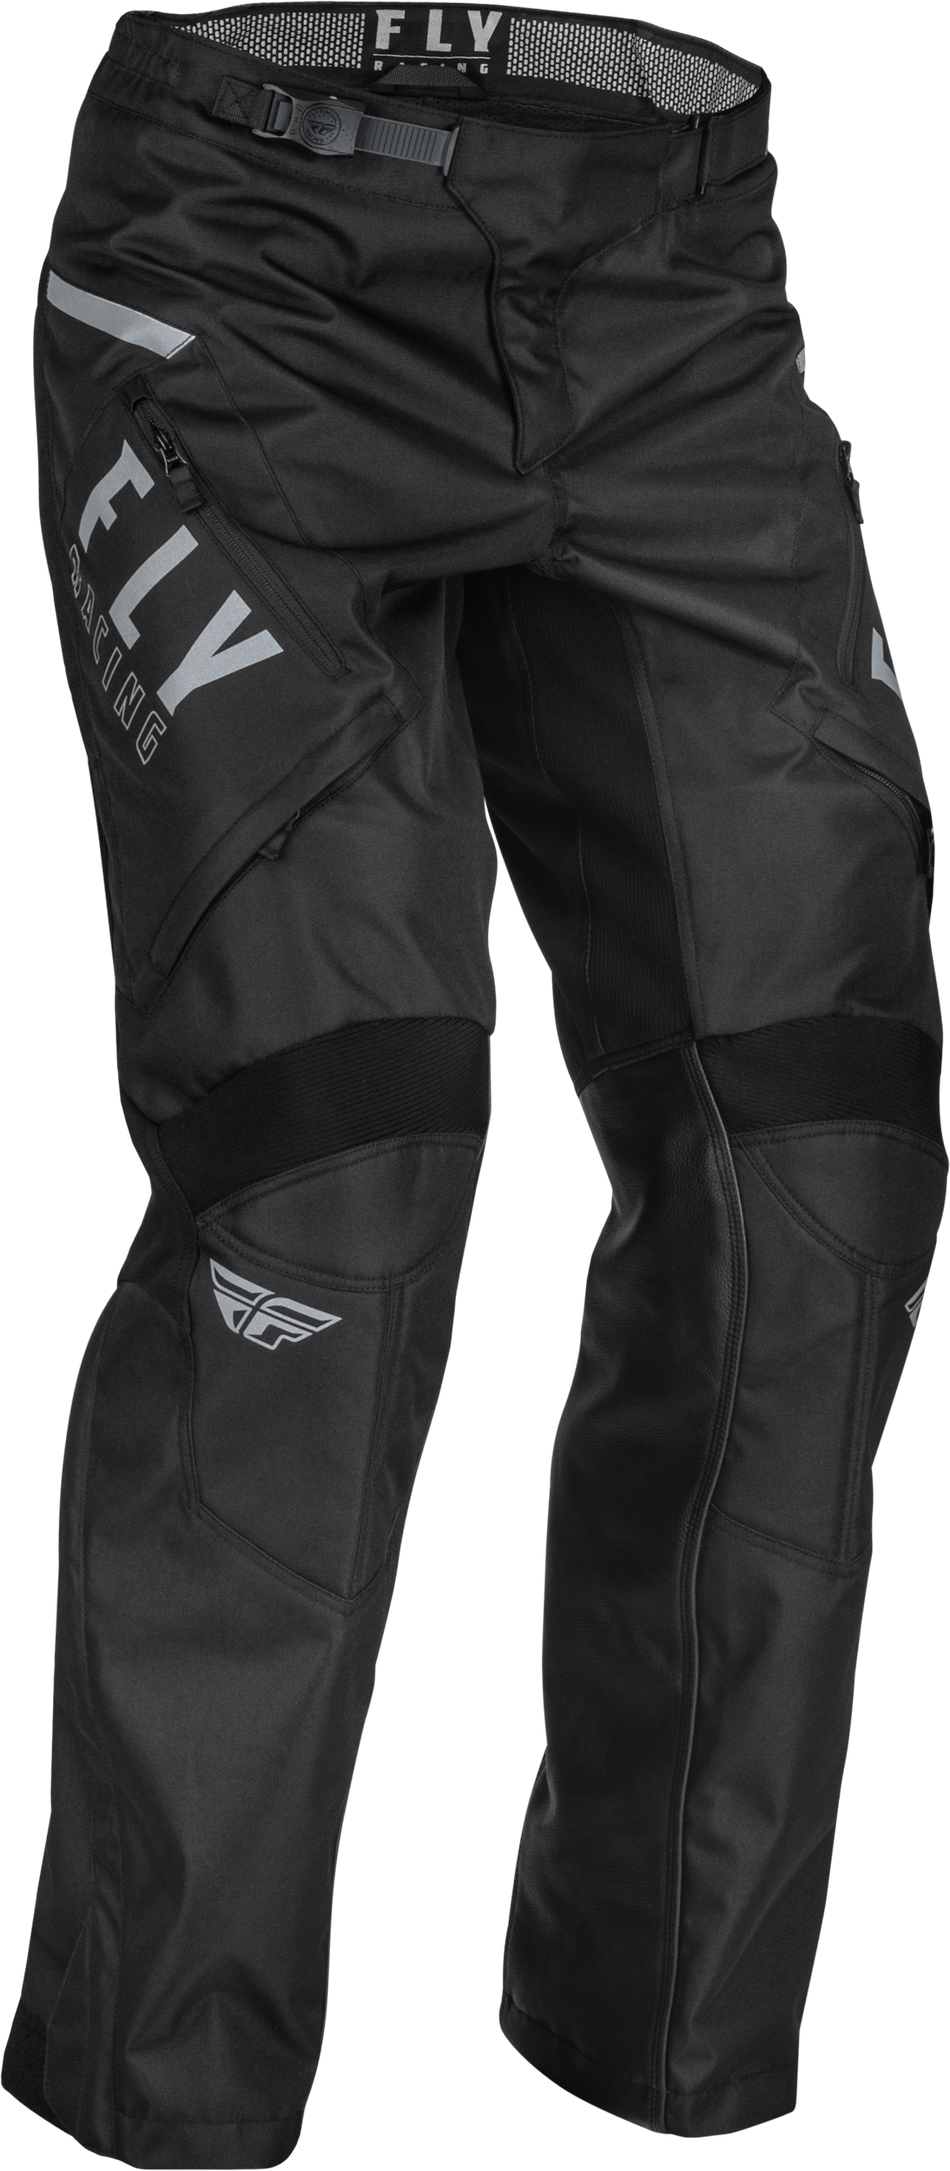 FLY RACING Patrol Over-Boot Pants Black/White Sz 36 376-64036